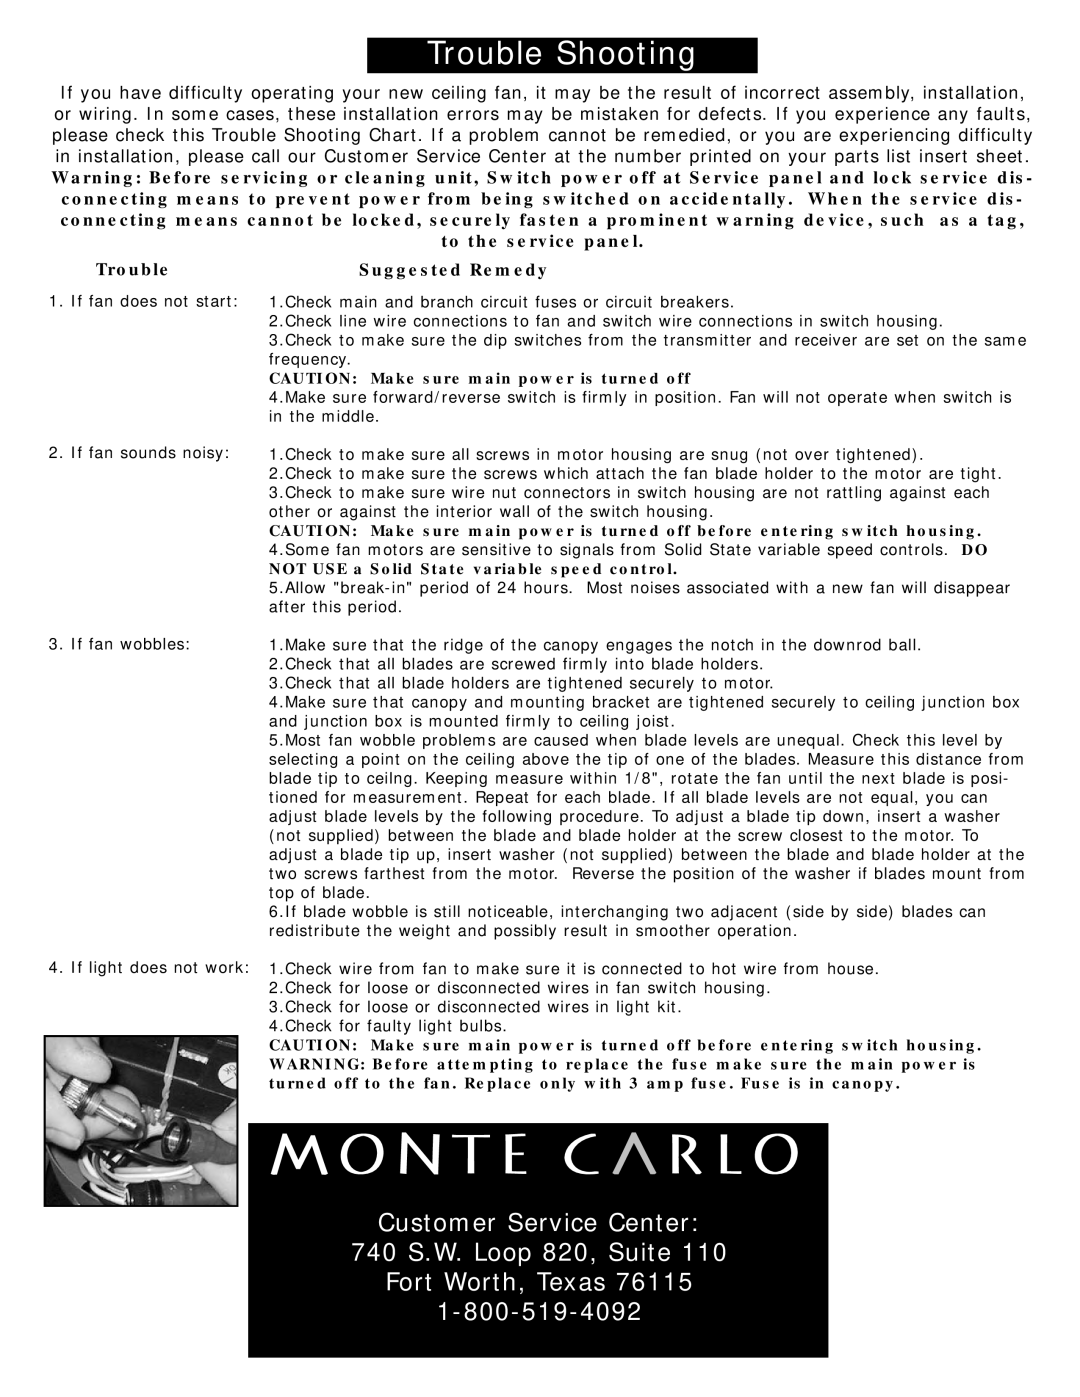 Monte Carlo Fan Company 5LOR52BSD owner manual Suggested Remedy, Customer Service Center 740 S.W. Loop 820, Suite 